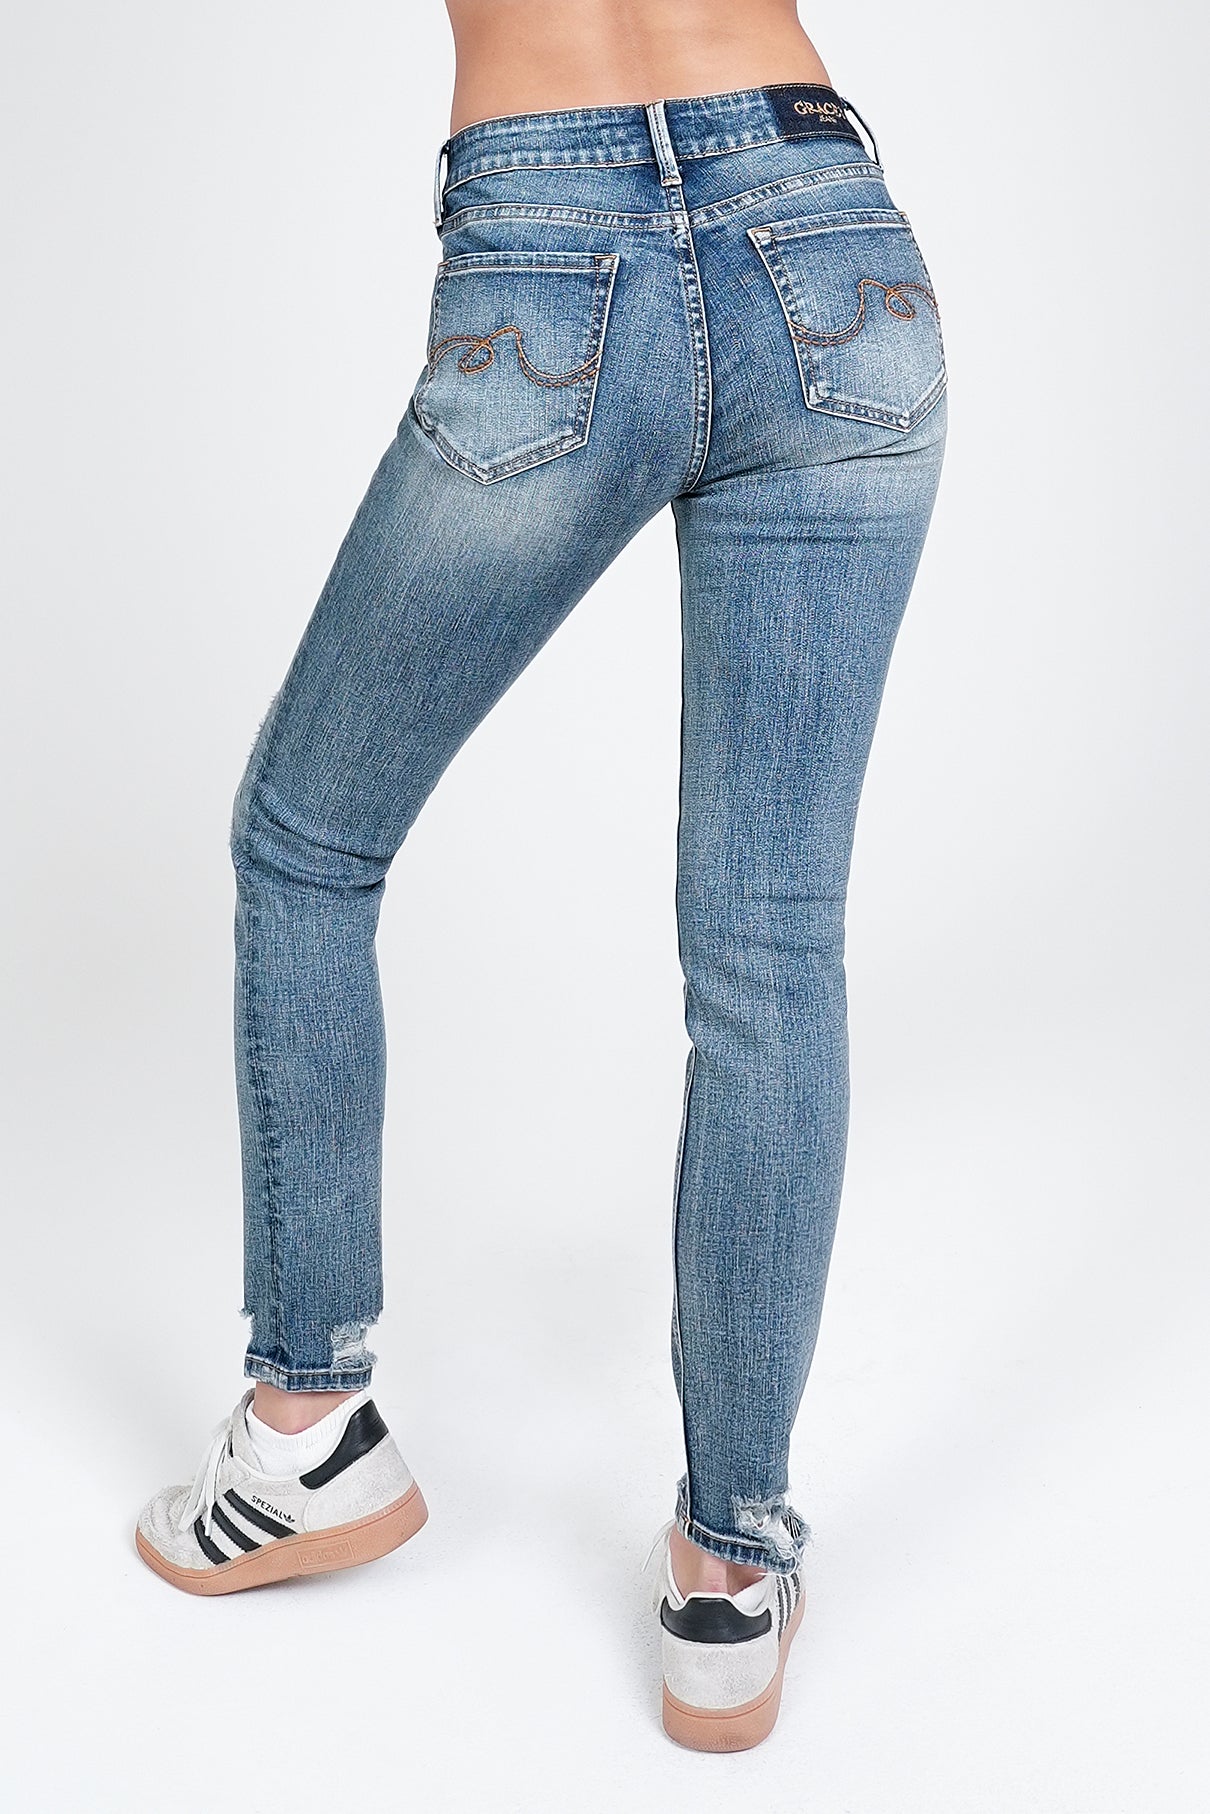 Simple Stitches Basic Light Blue Distressed Mid Rise Skinny Jeans